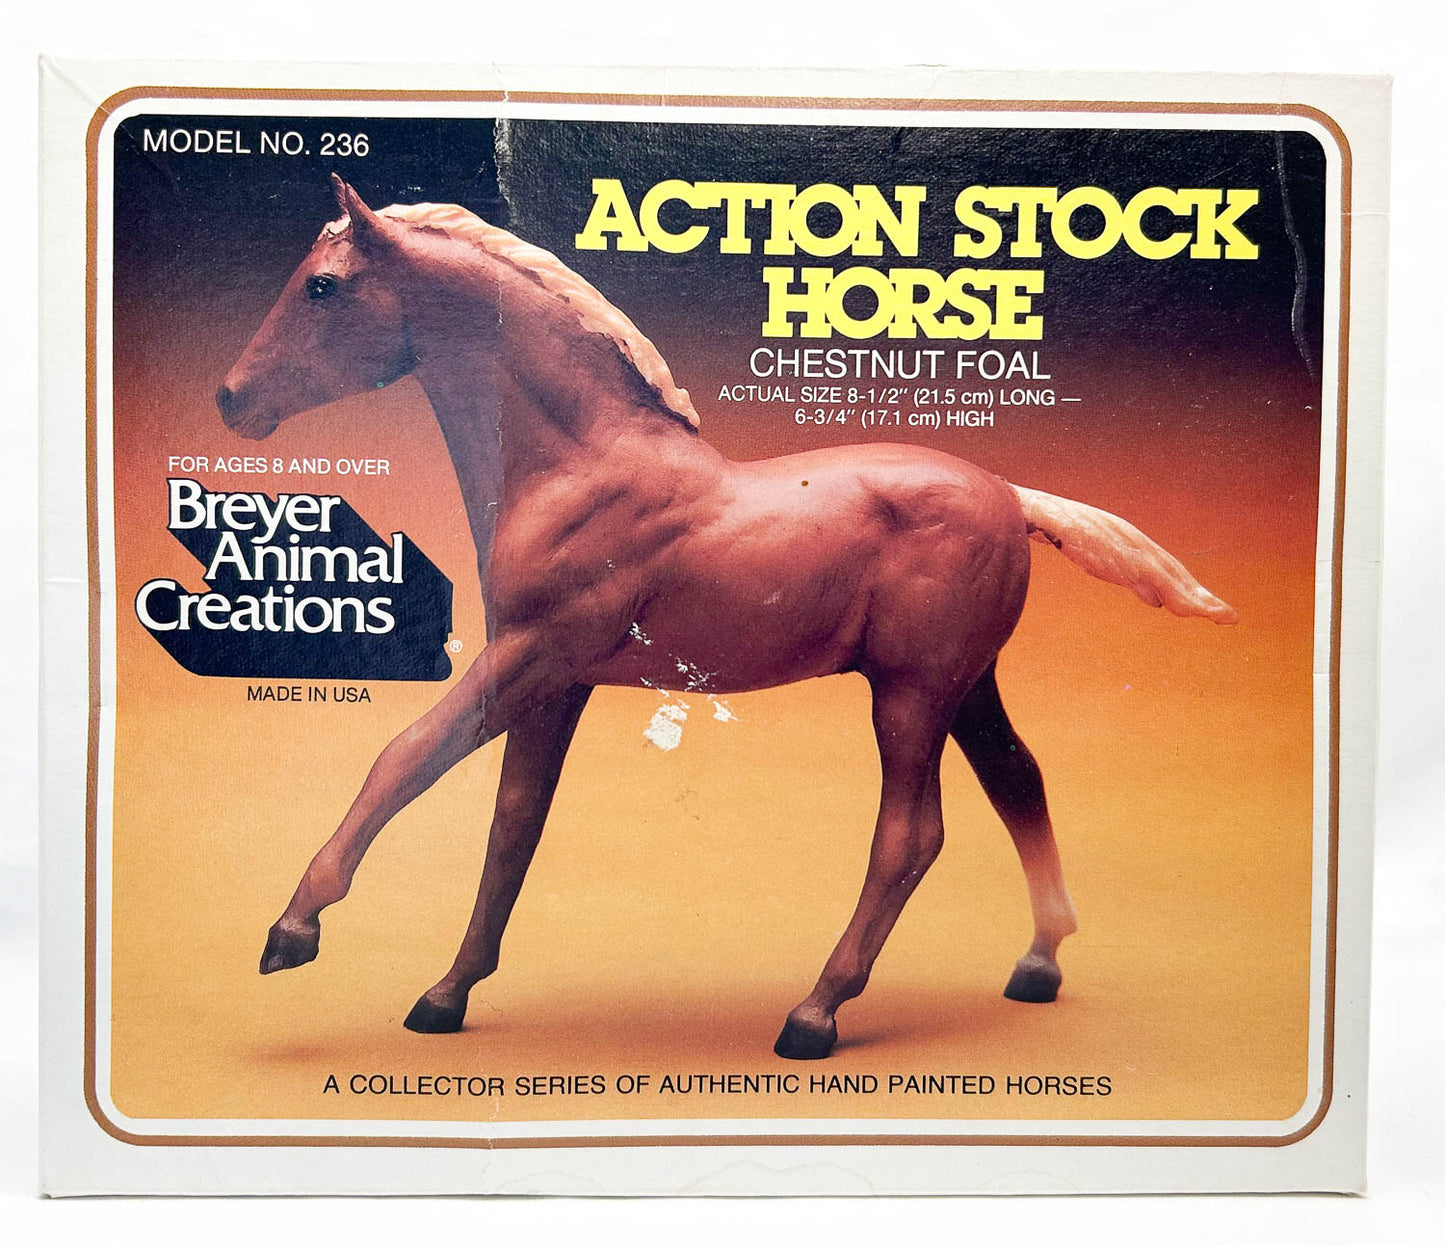 Box:  Action Stock Horse Foal, Chestnut (sale for charity)